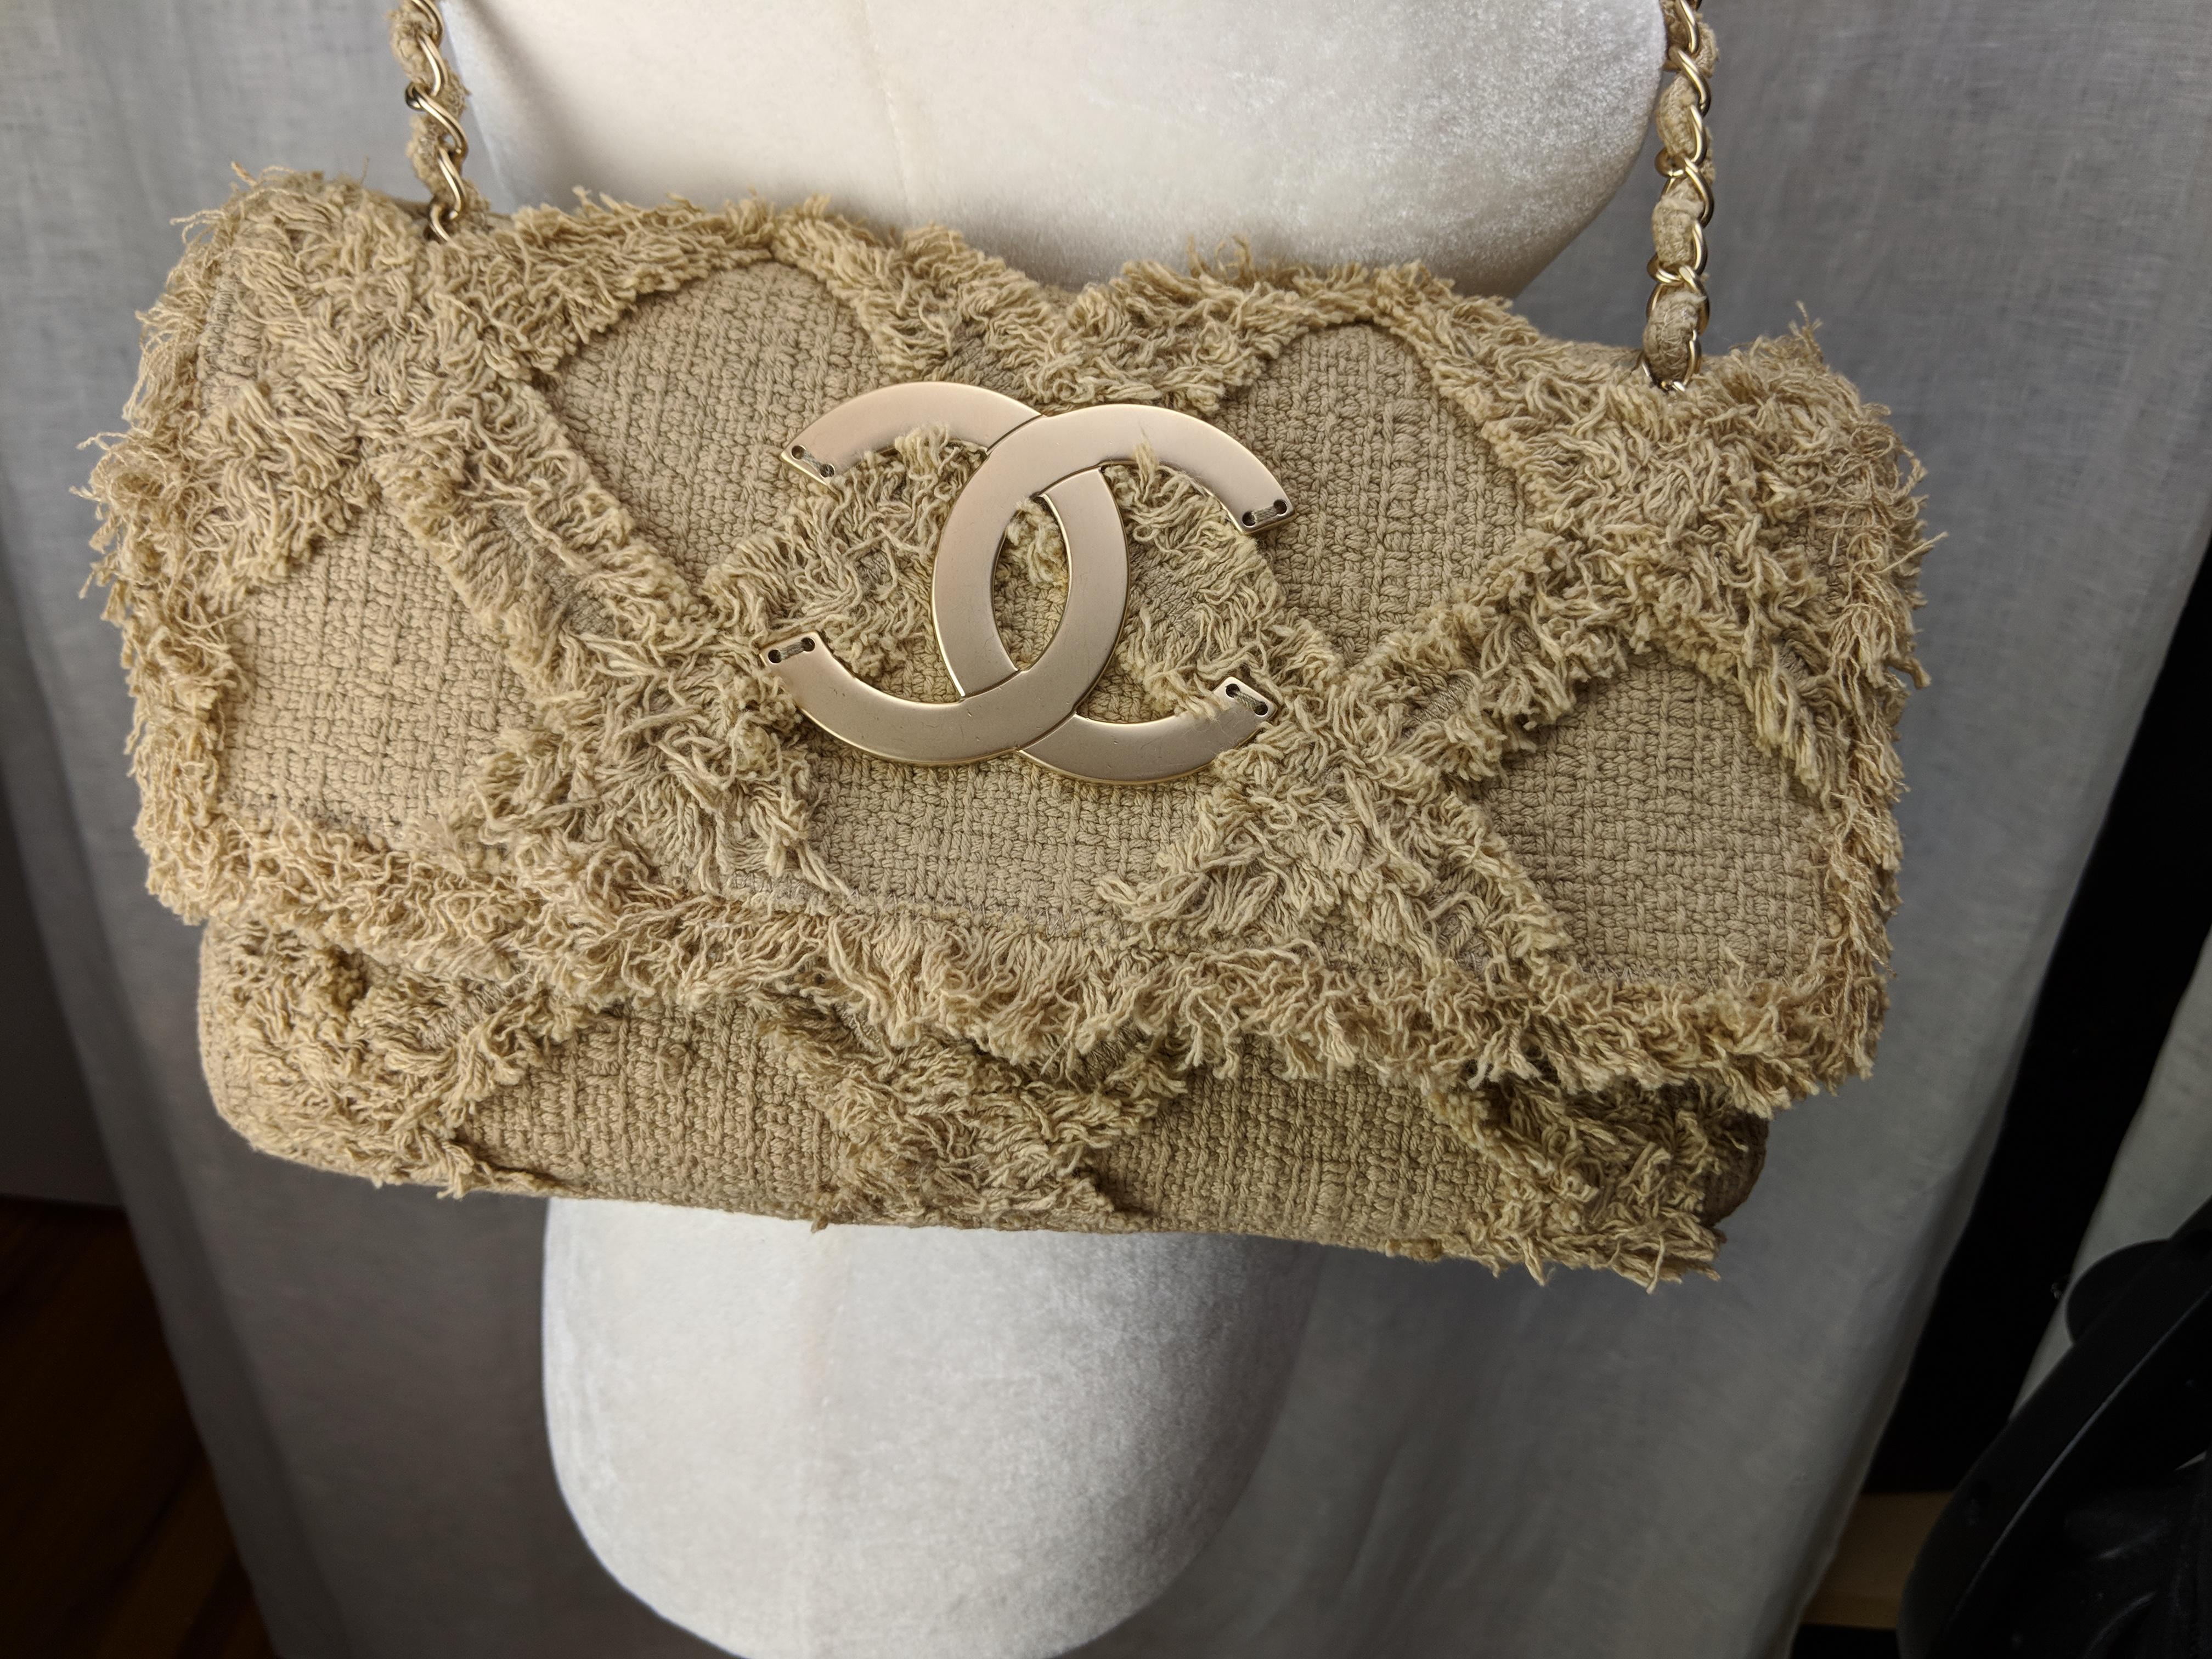 Chanel 2009 Small Sized Beige Tweed Fringe Organic Crochet Nature Flap Bag For Sale 2